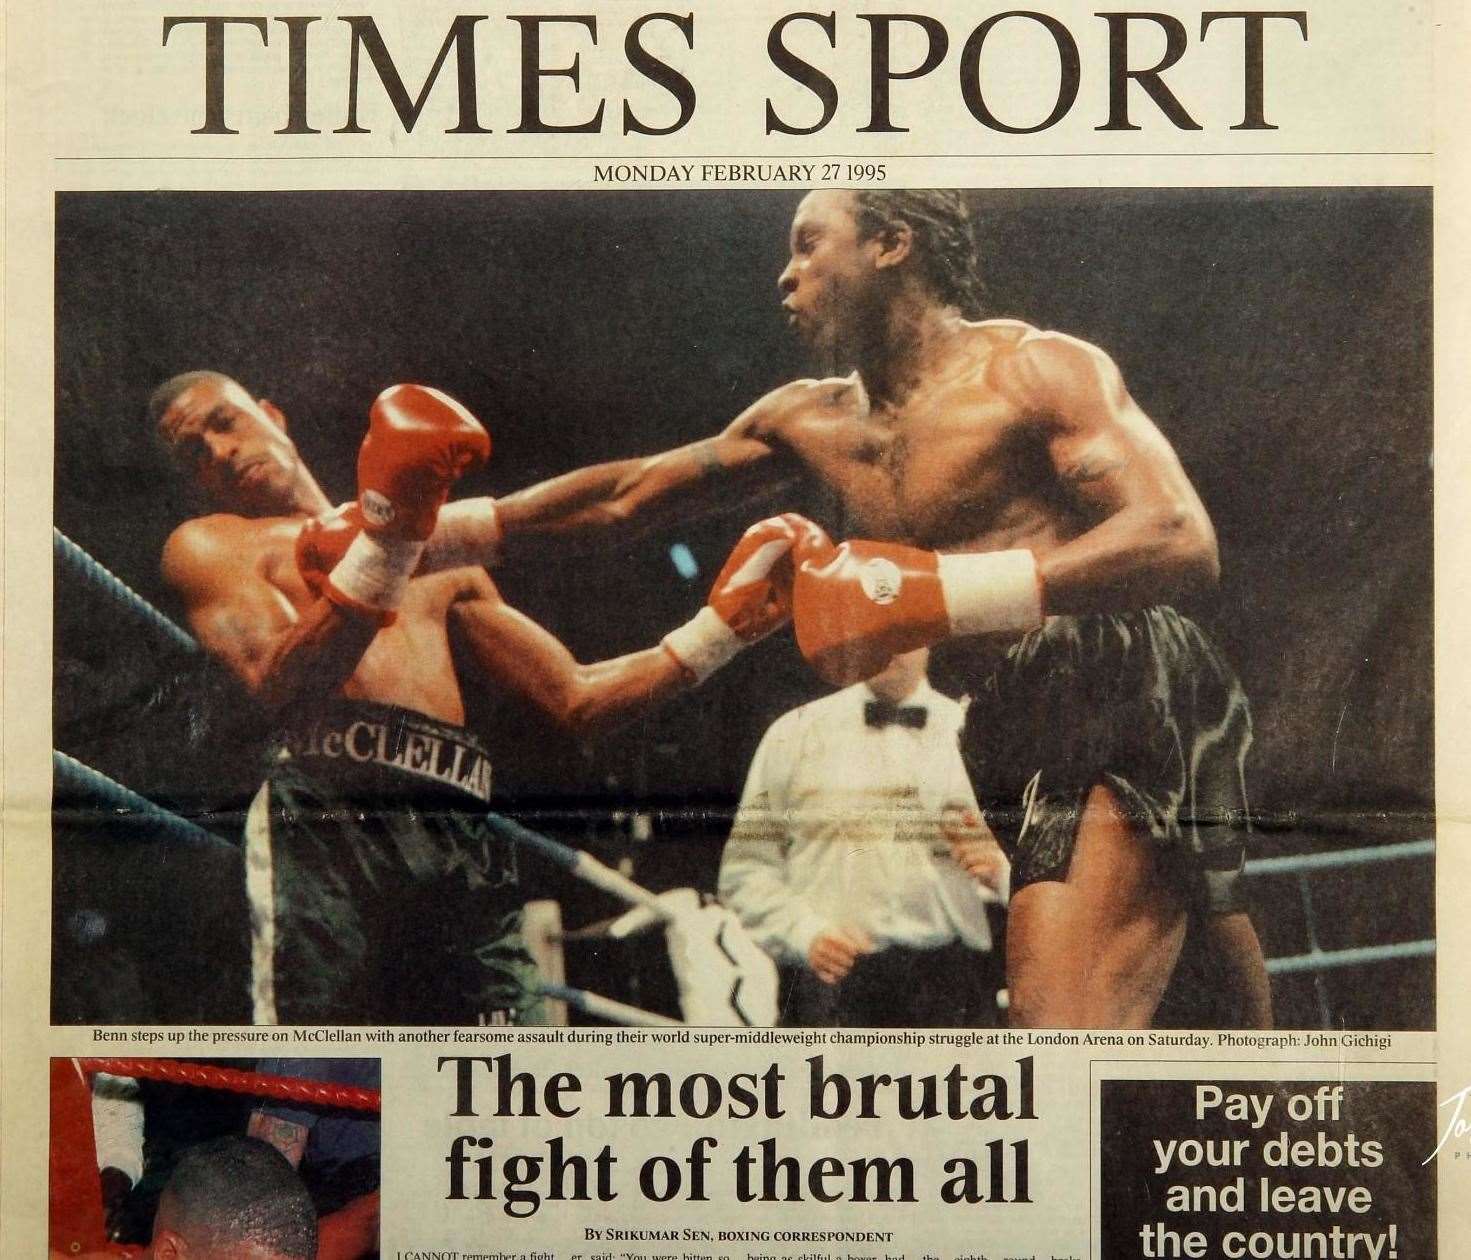 John photographed the infamous fight between Nigel Benn and Gerald McClellan in 1995, which left the latter with brain damage Pic: John Gichigi/Getty Images